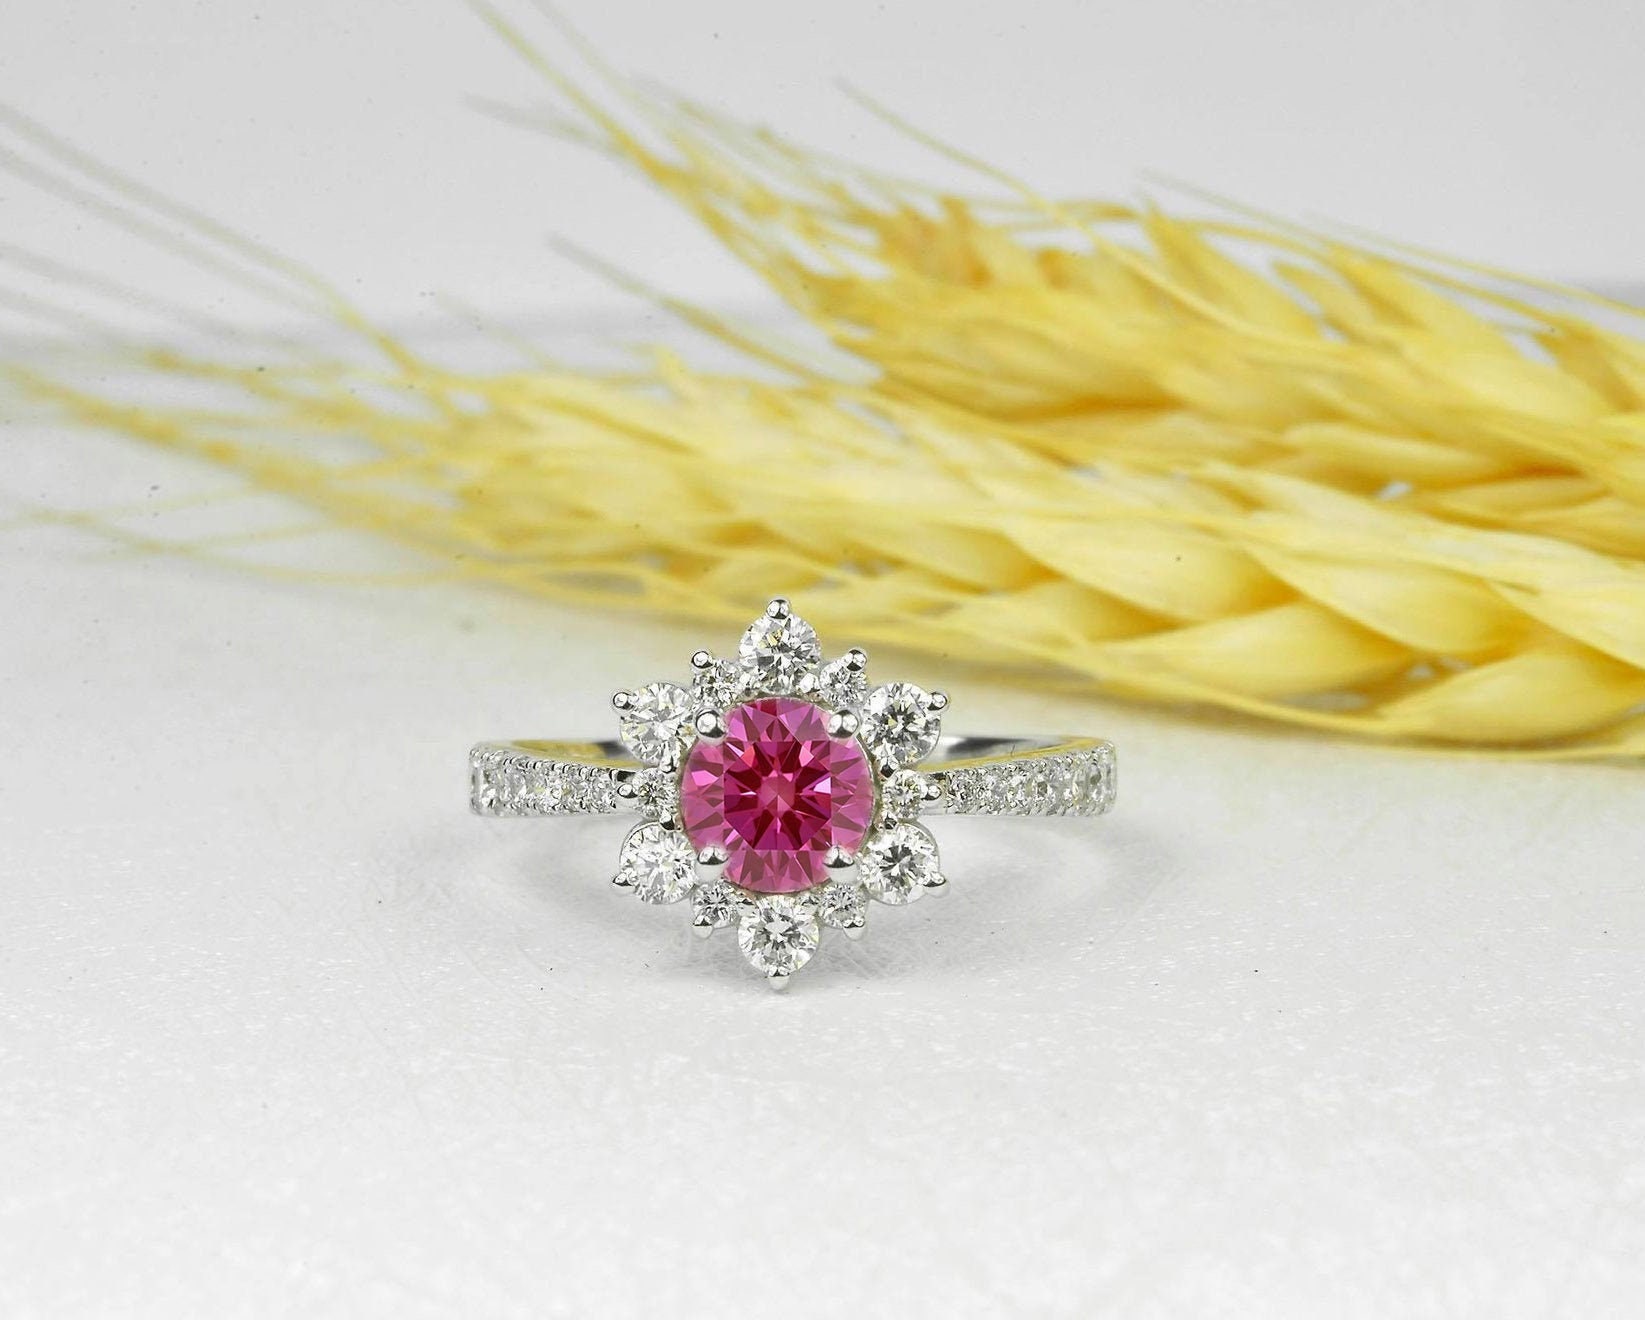 Dark Pink Engagement Ring | Sapphire & Diamond Cluster White Gold Vintage Ring Halo Anniversary Unique Bridal